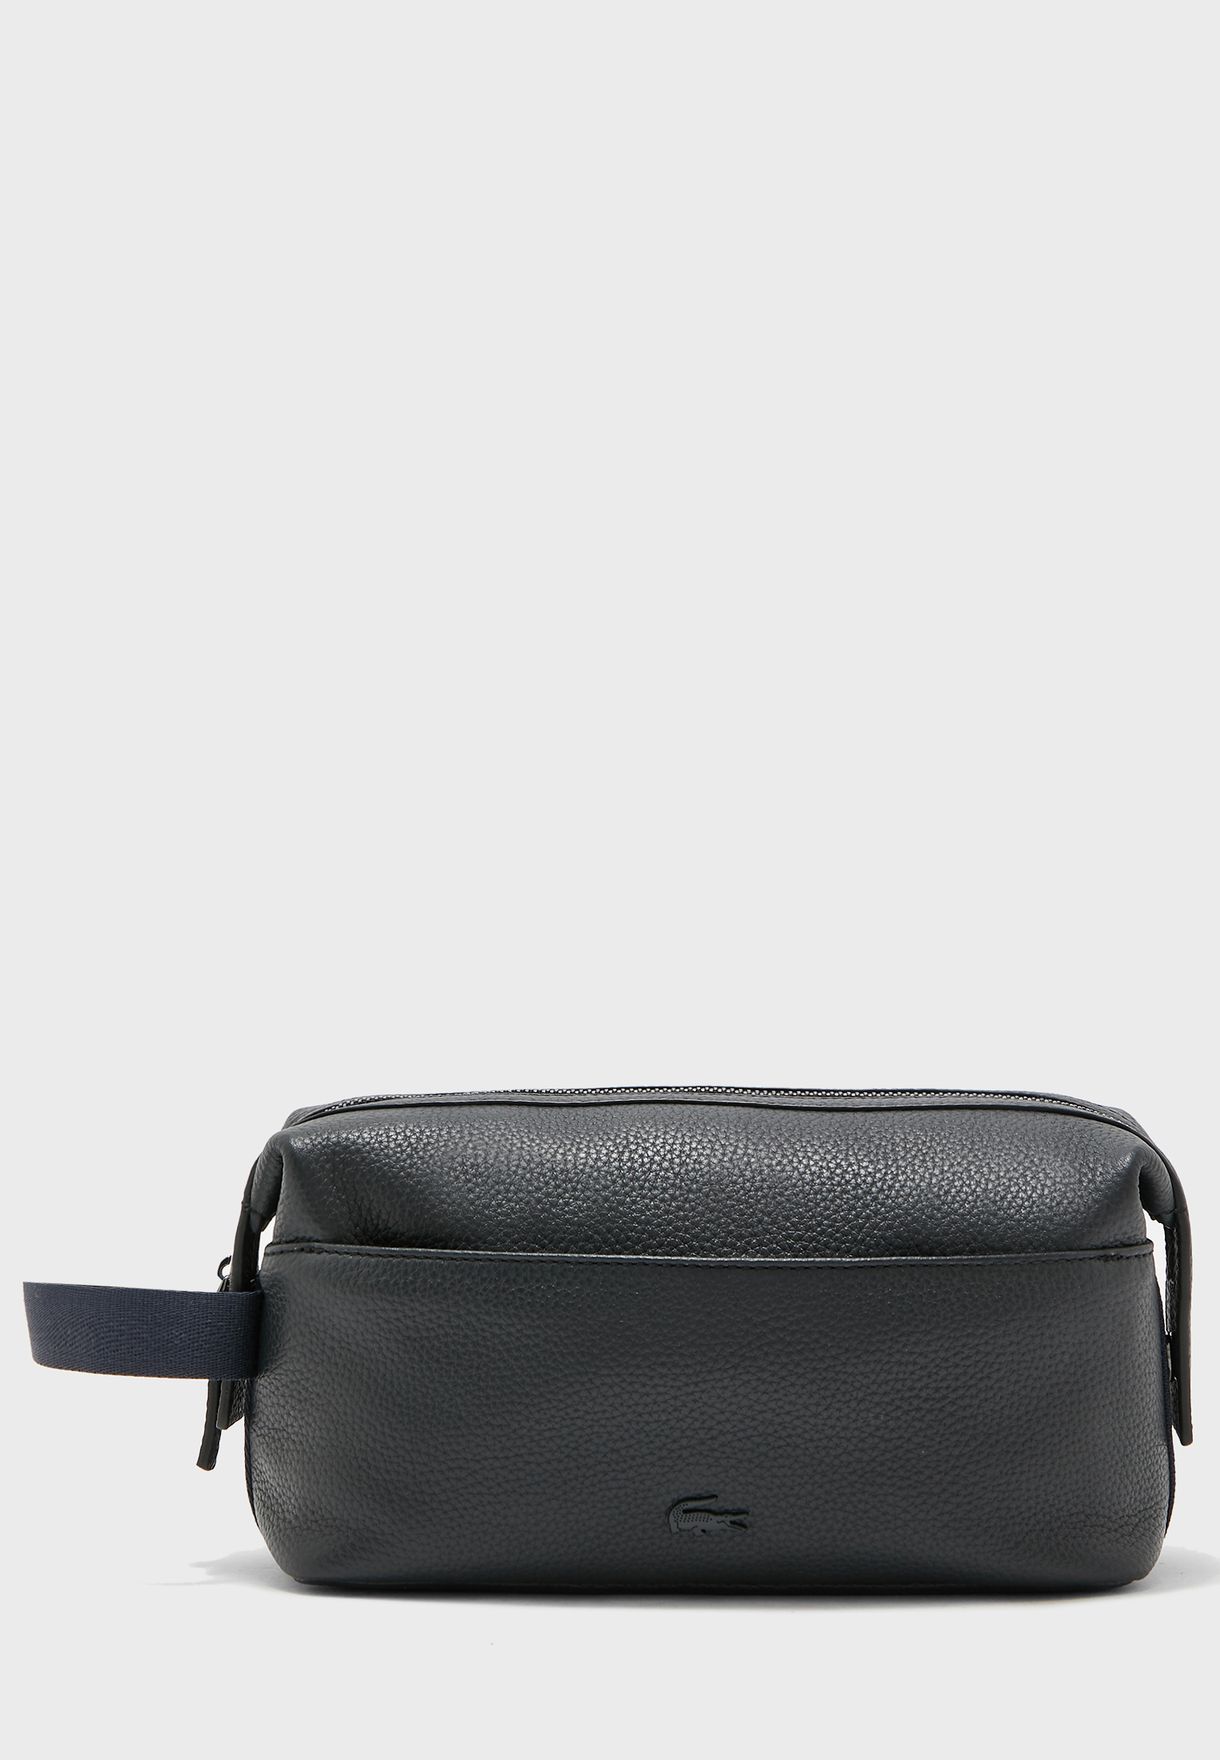 lacoste toiletry bag